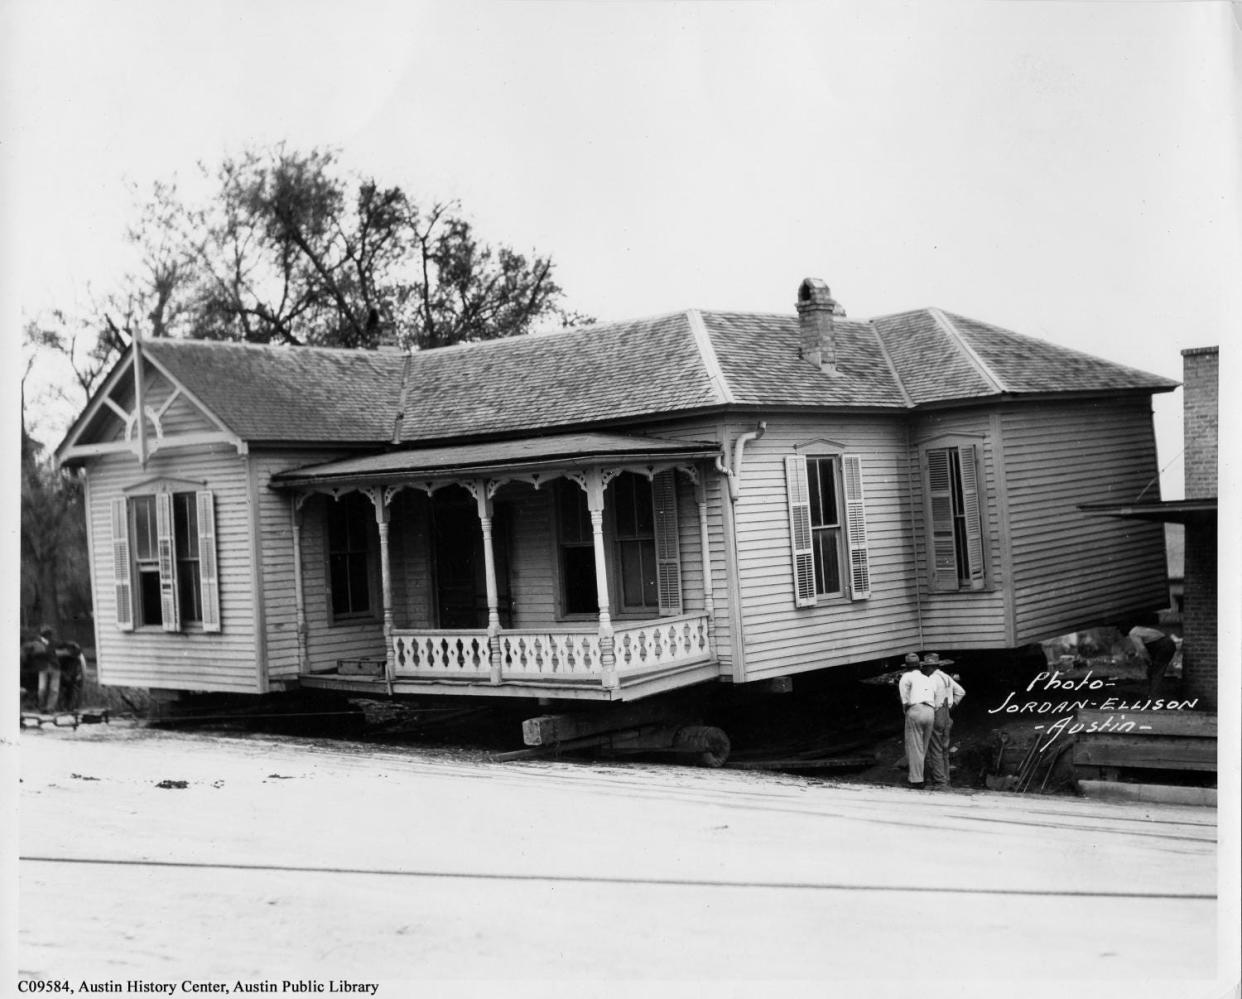 Moving the O. Henry House from East Fourth to East Fifth in 1934, as captured by the Jordan-Ellison Co. It now serves as a museum about the internationally celebrated author, who lived in Austin from 1884 to 1895.